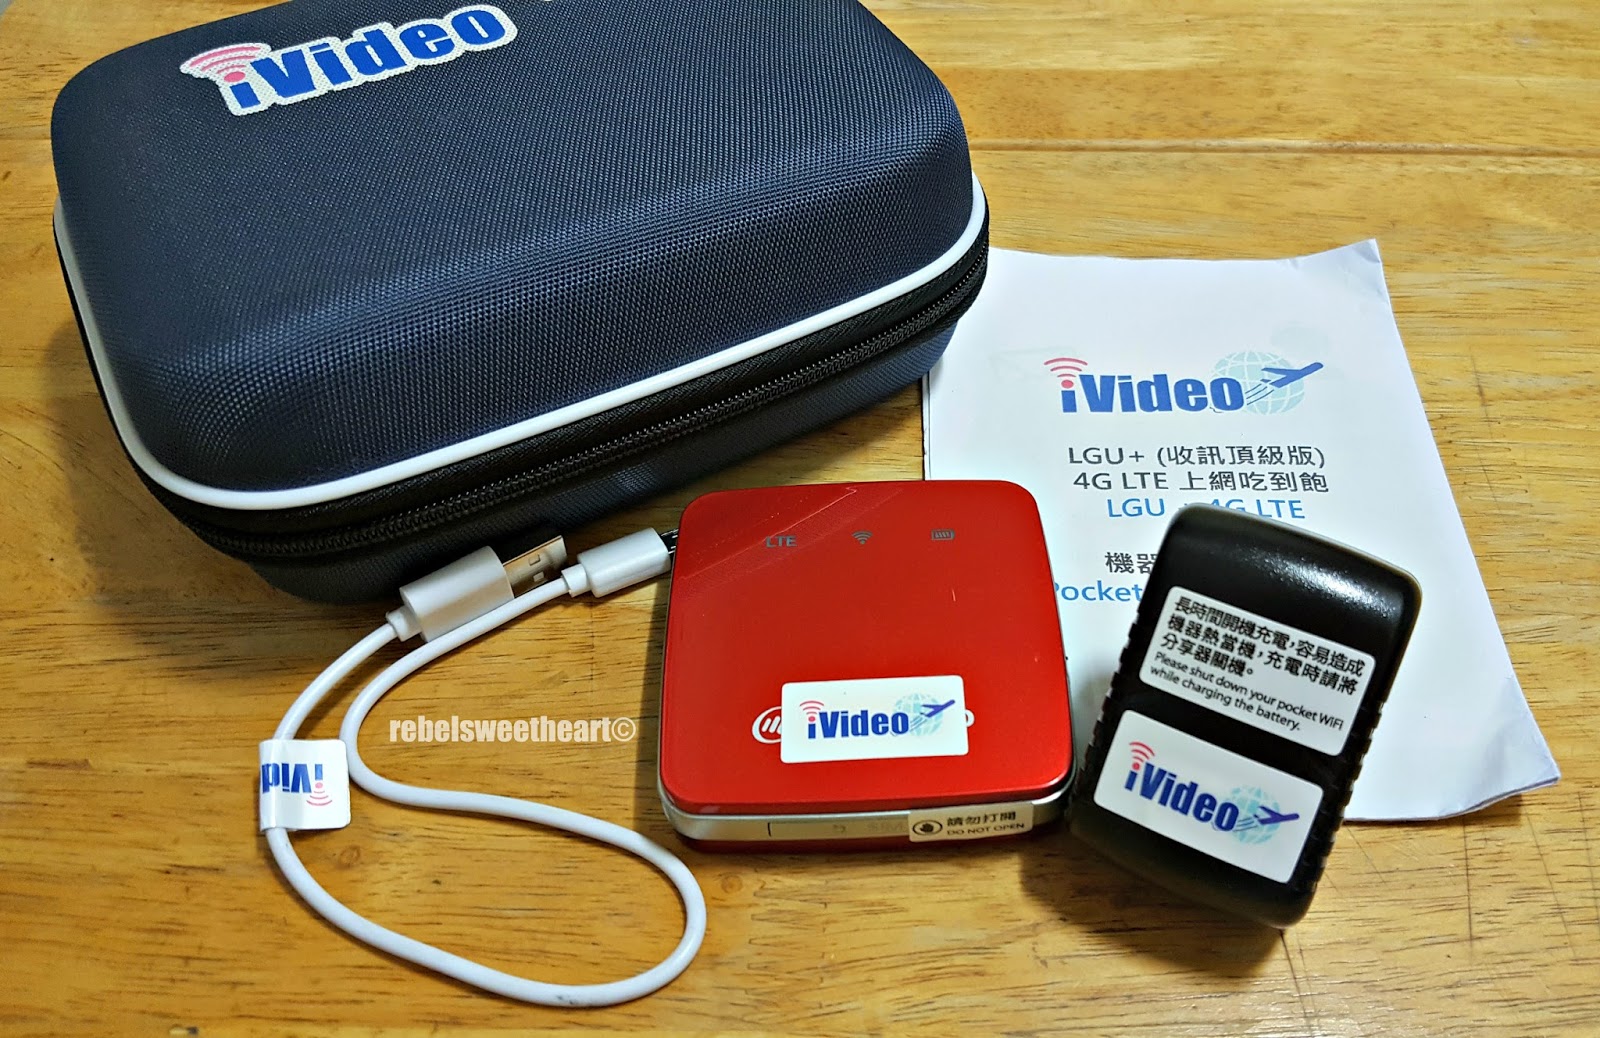 ivideo pocket wifi review